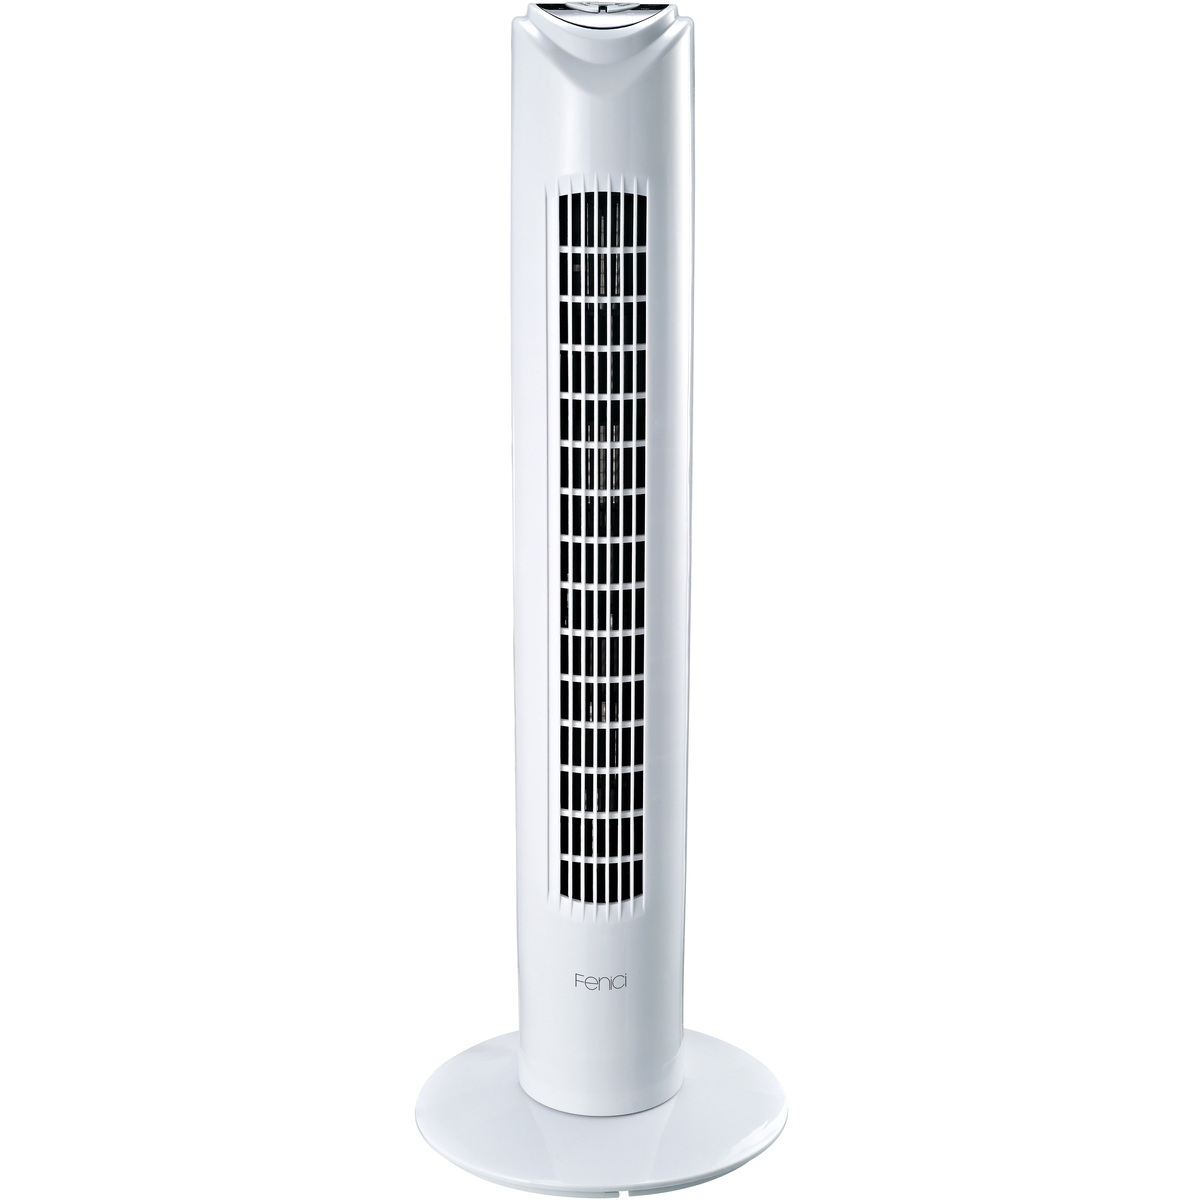 Fenici 80cm Tower Fan With Remote Control White Fyf29rb with regard to measurements 1200 X 1200